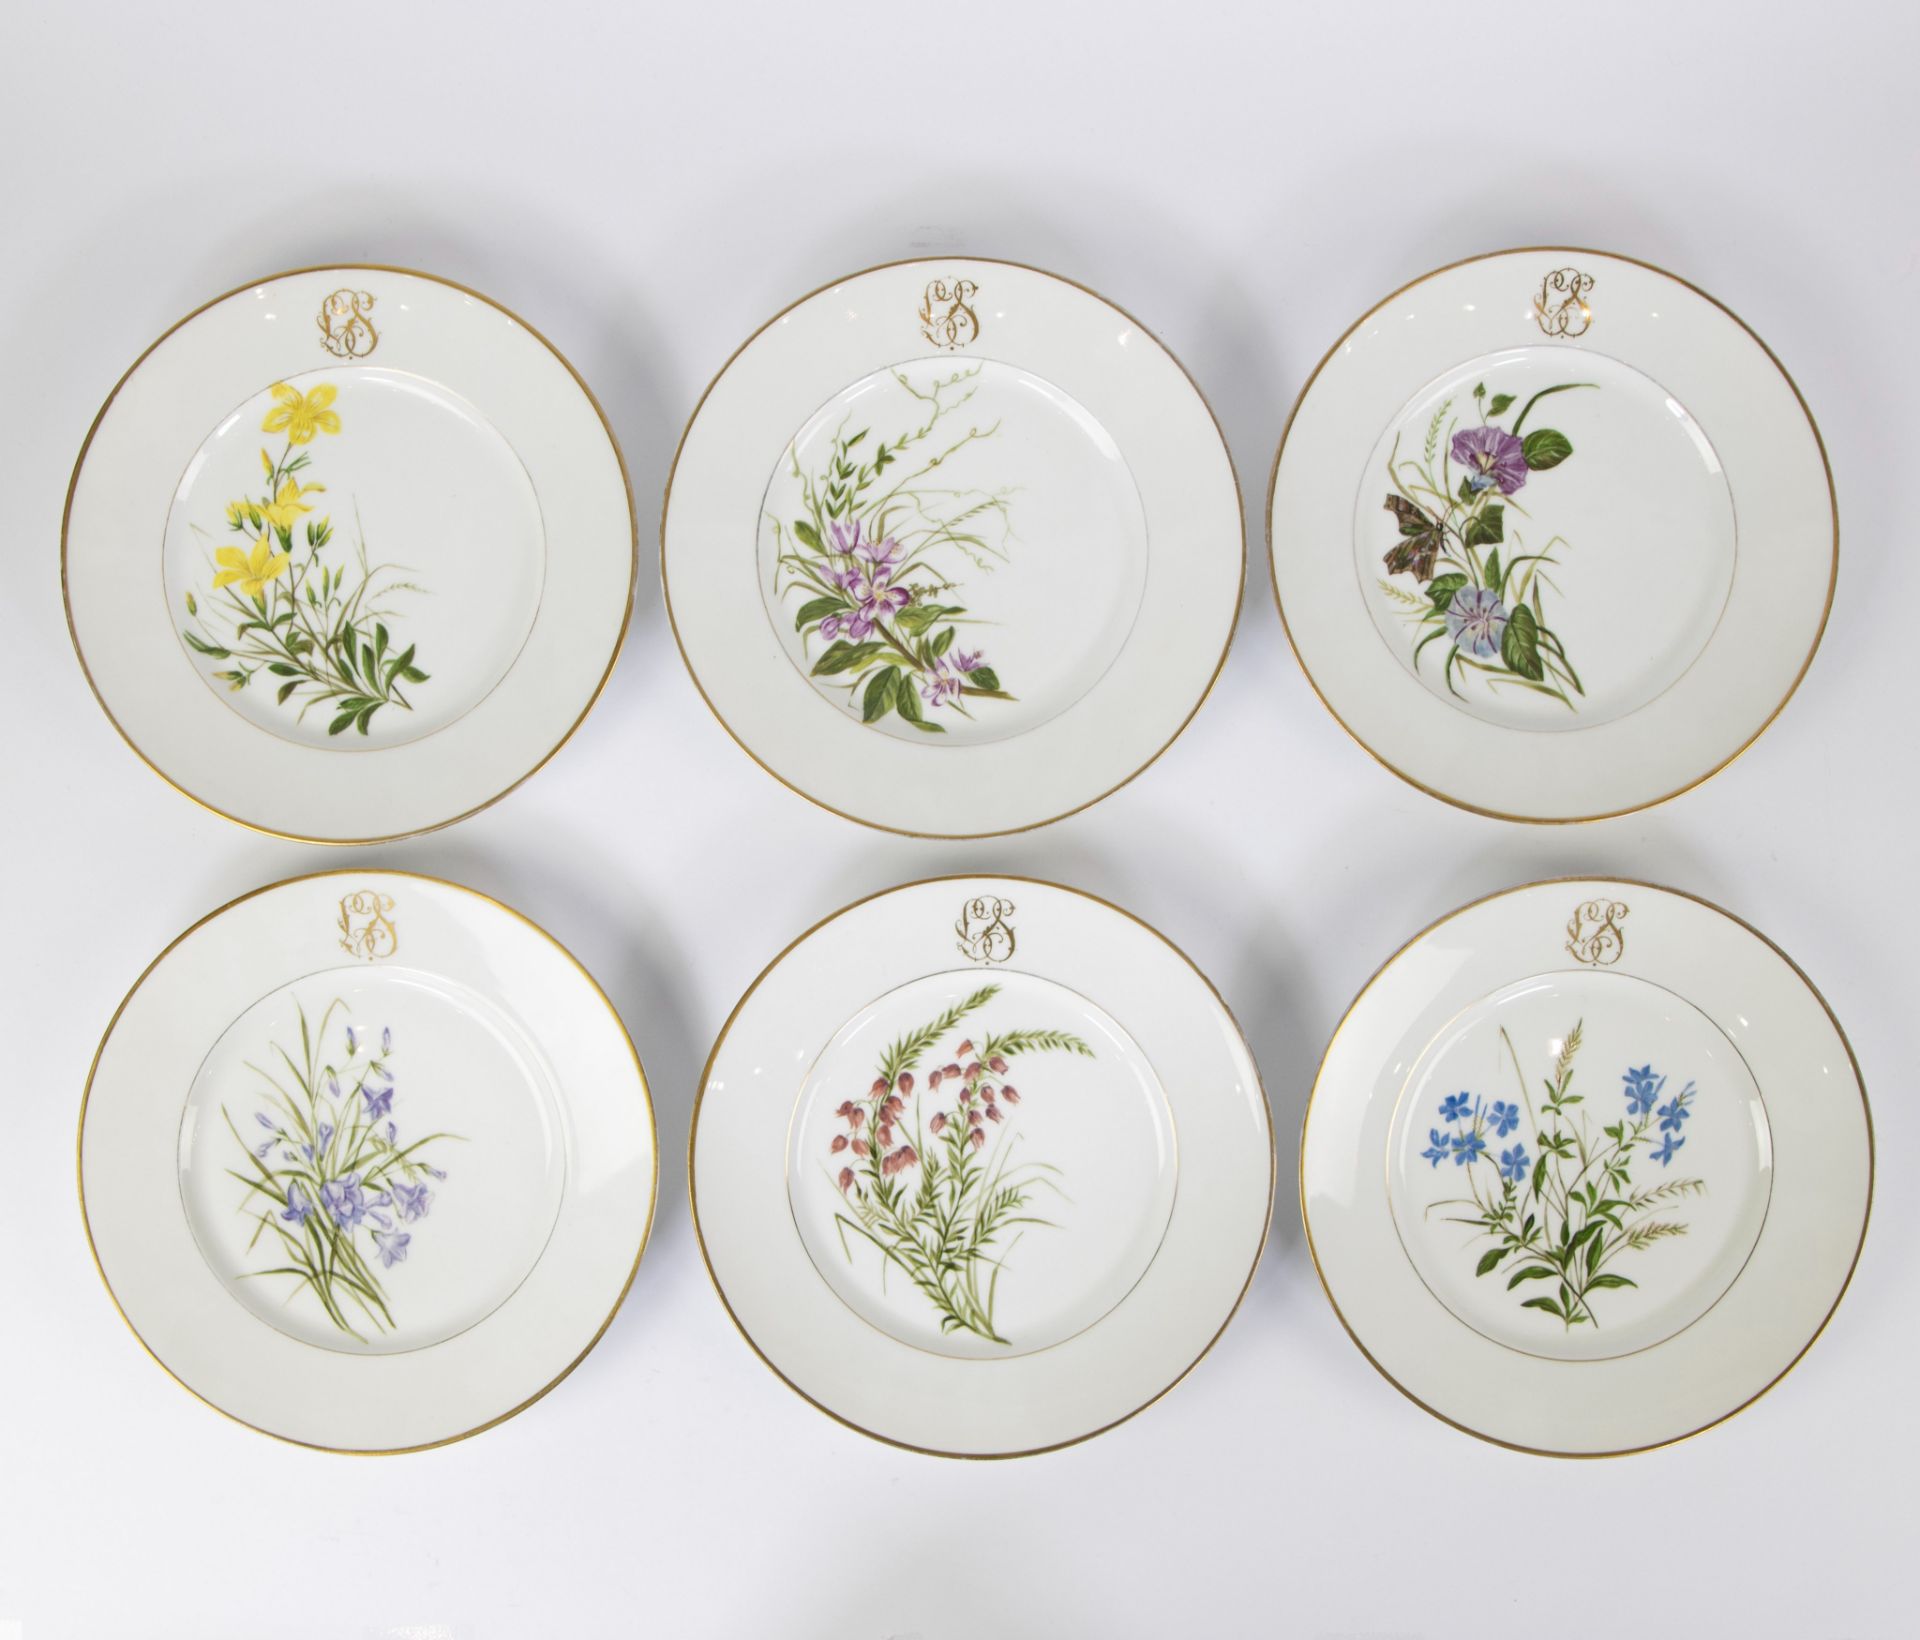 Set of 9 Limoges plates with hand-painted floral decor, with decorated initials, 19th century. - Bild 2 aus 4